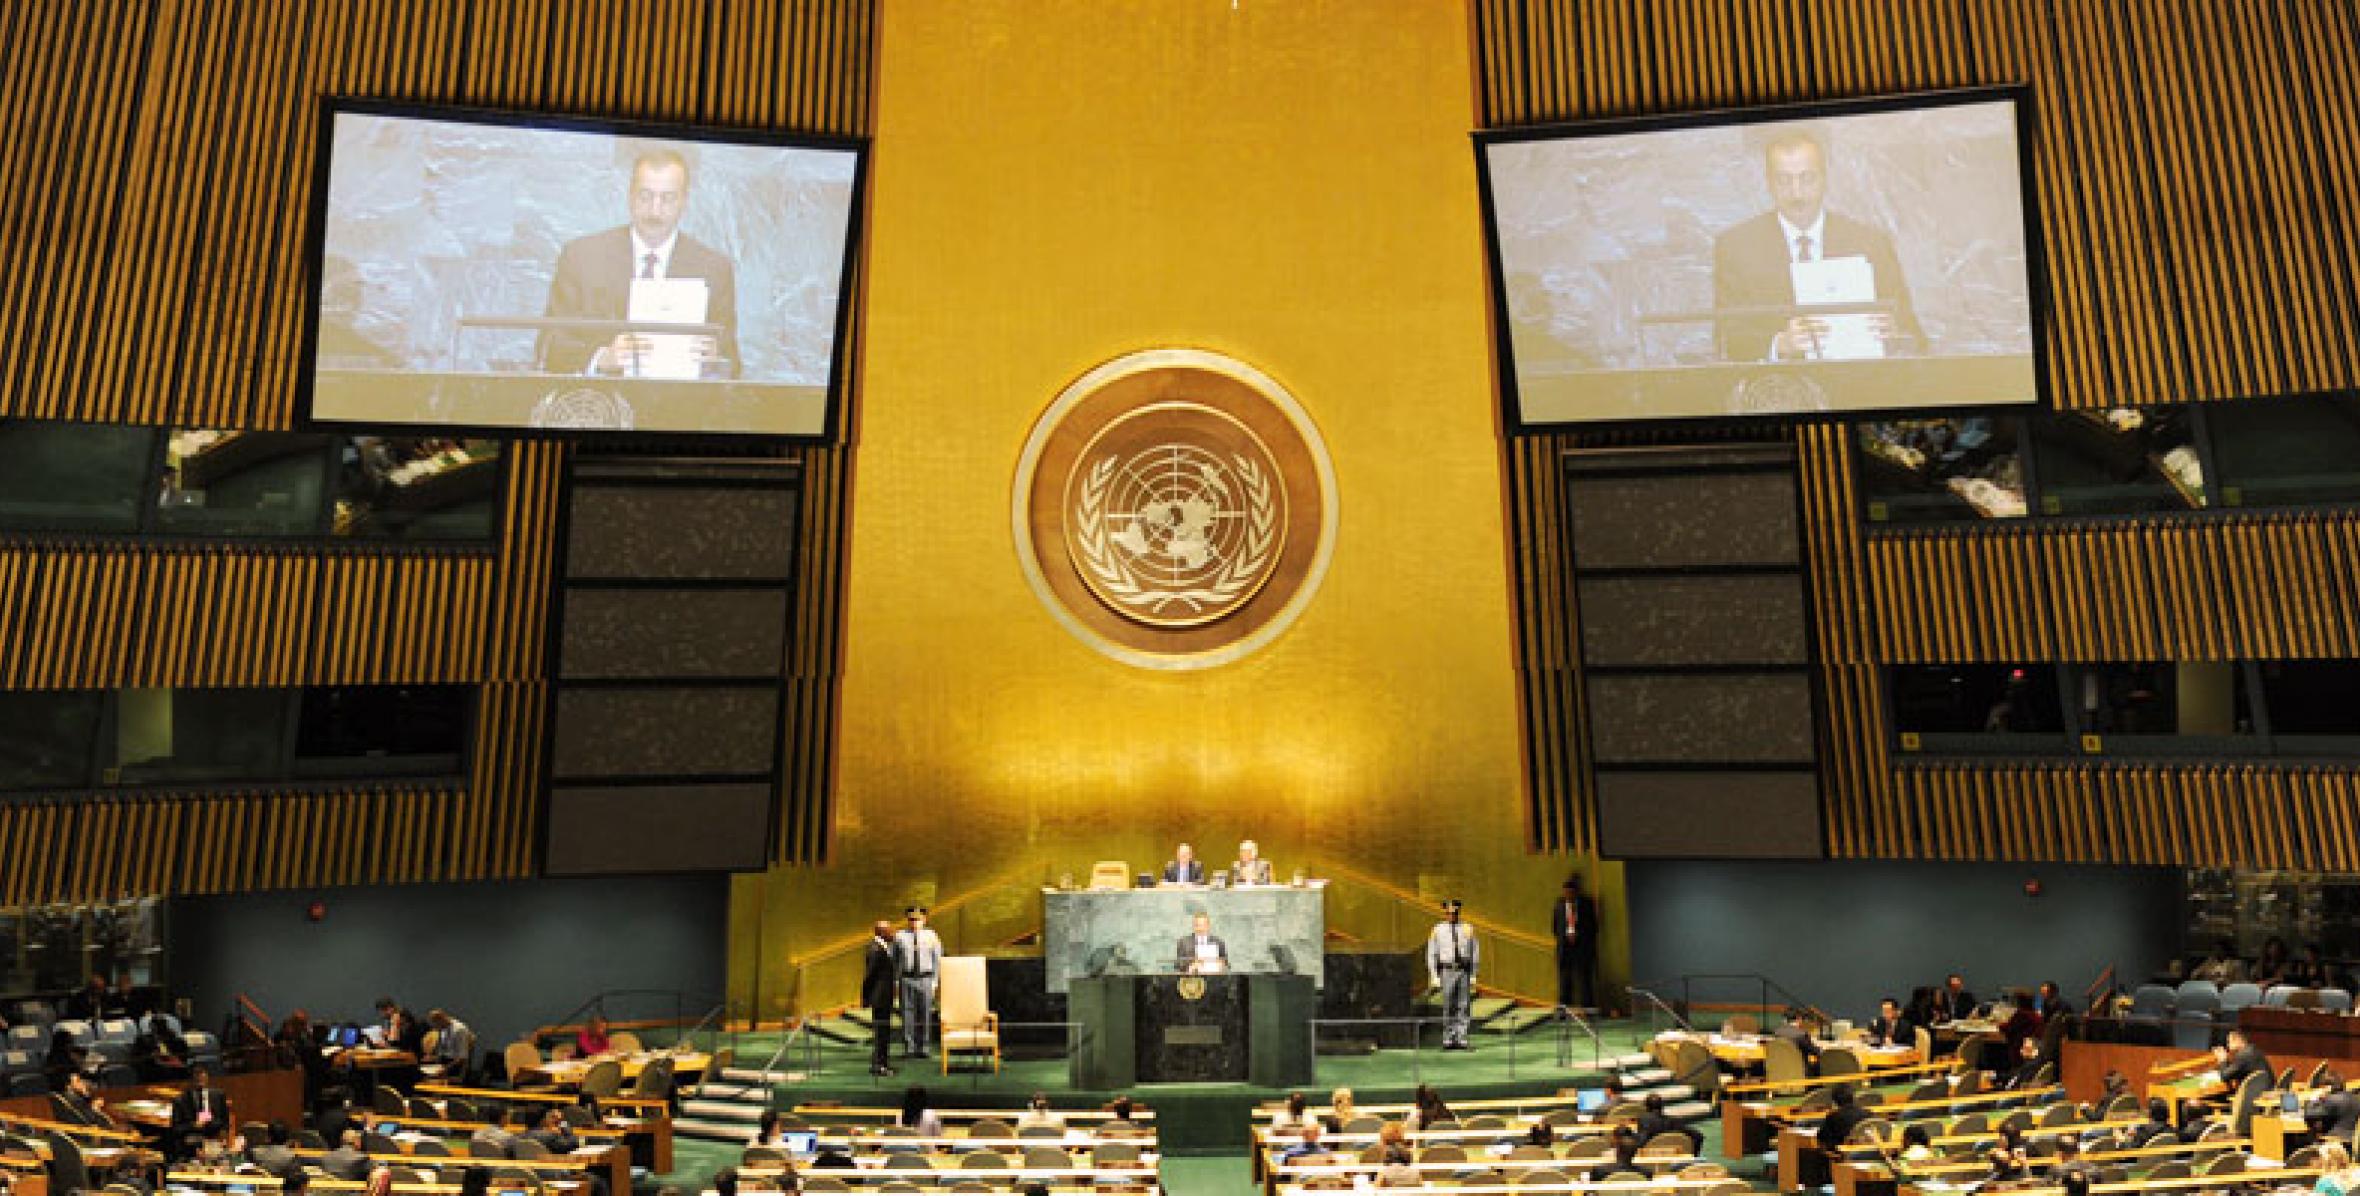 Ilham Aliyev delivered a speech at the 65th session of the United Nations General Assembly